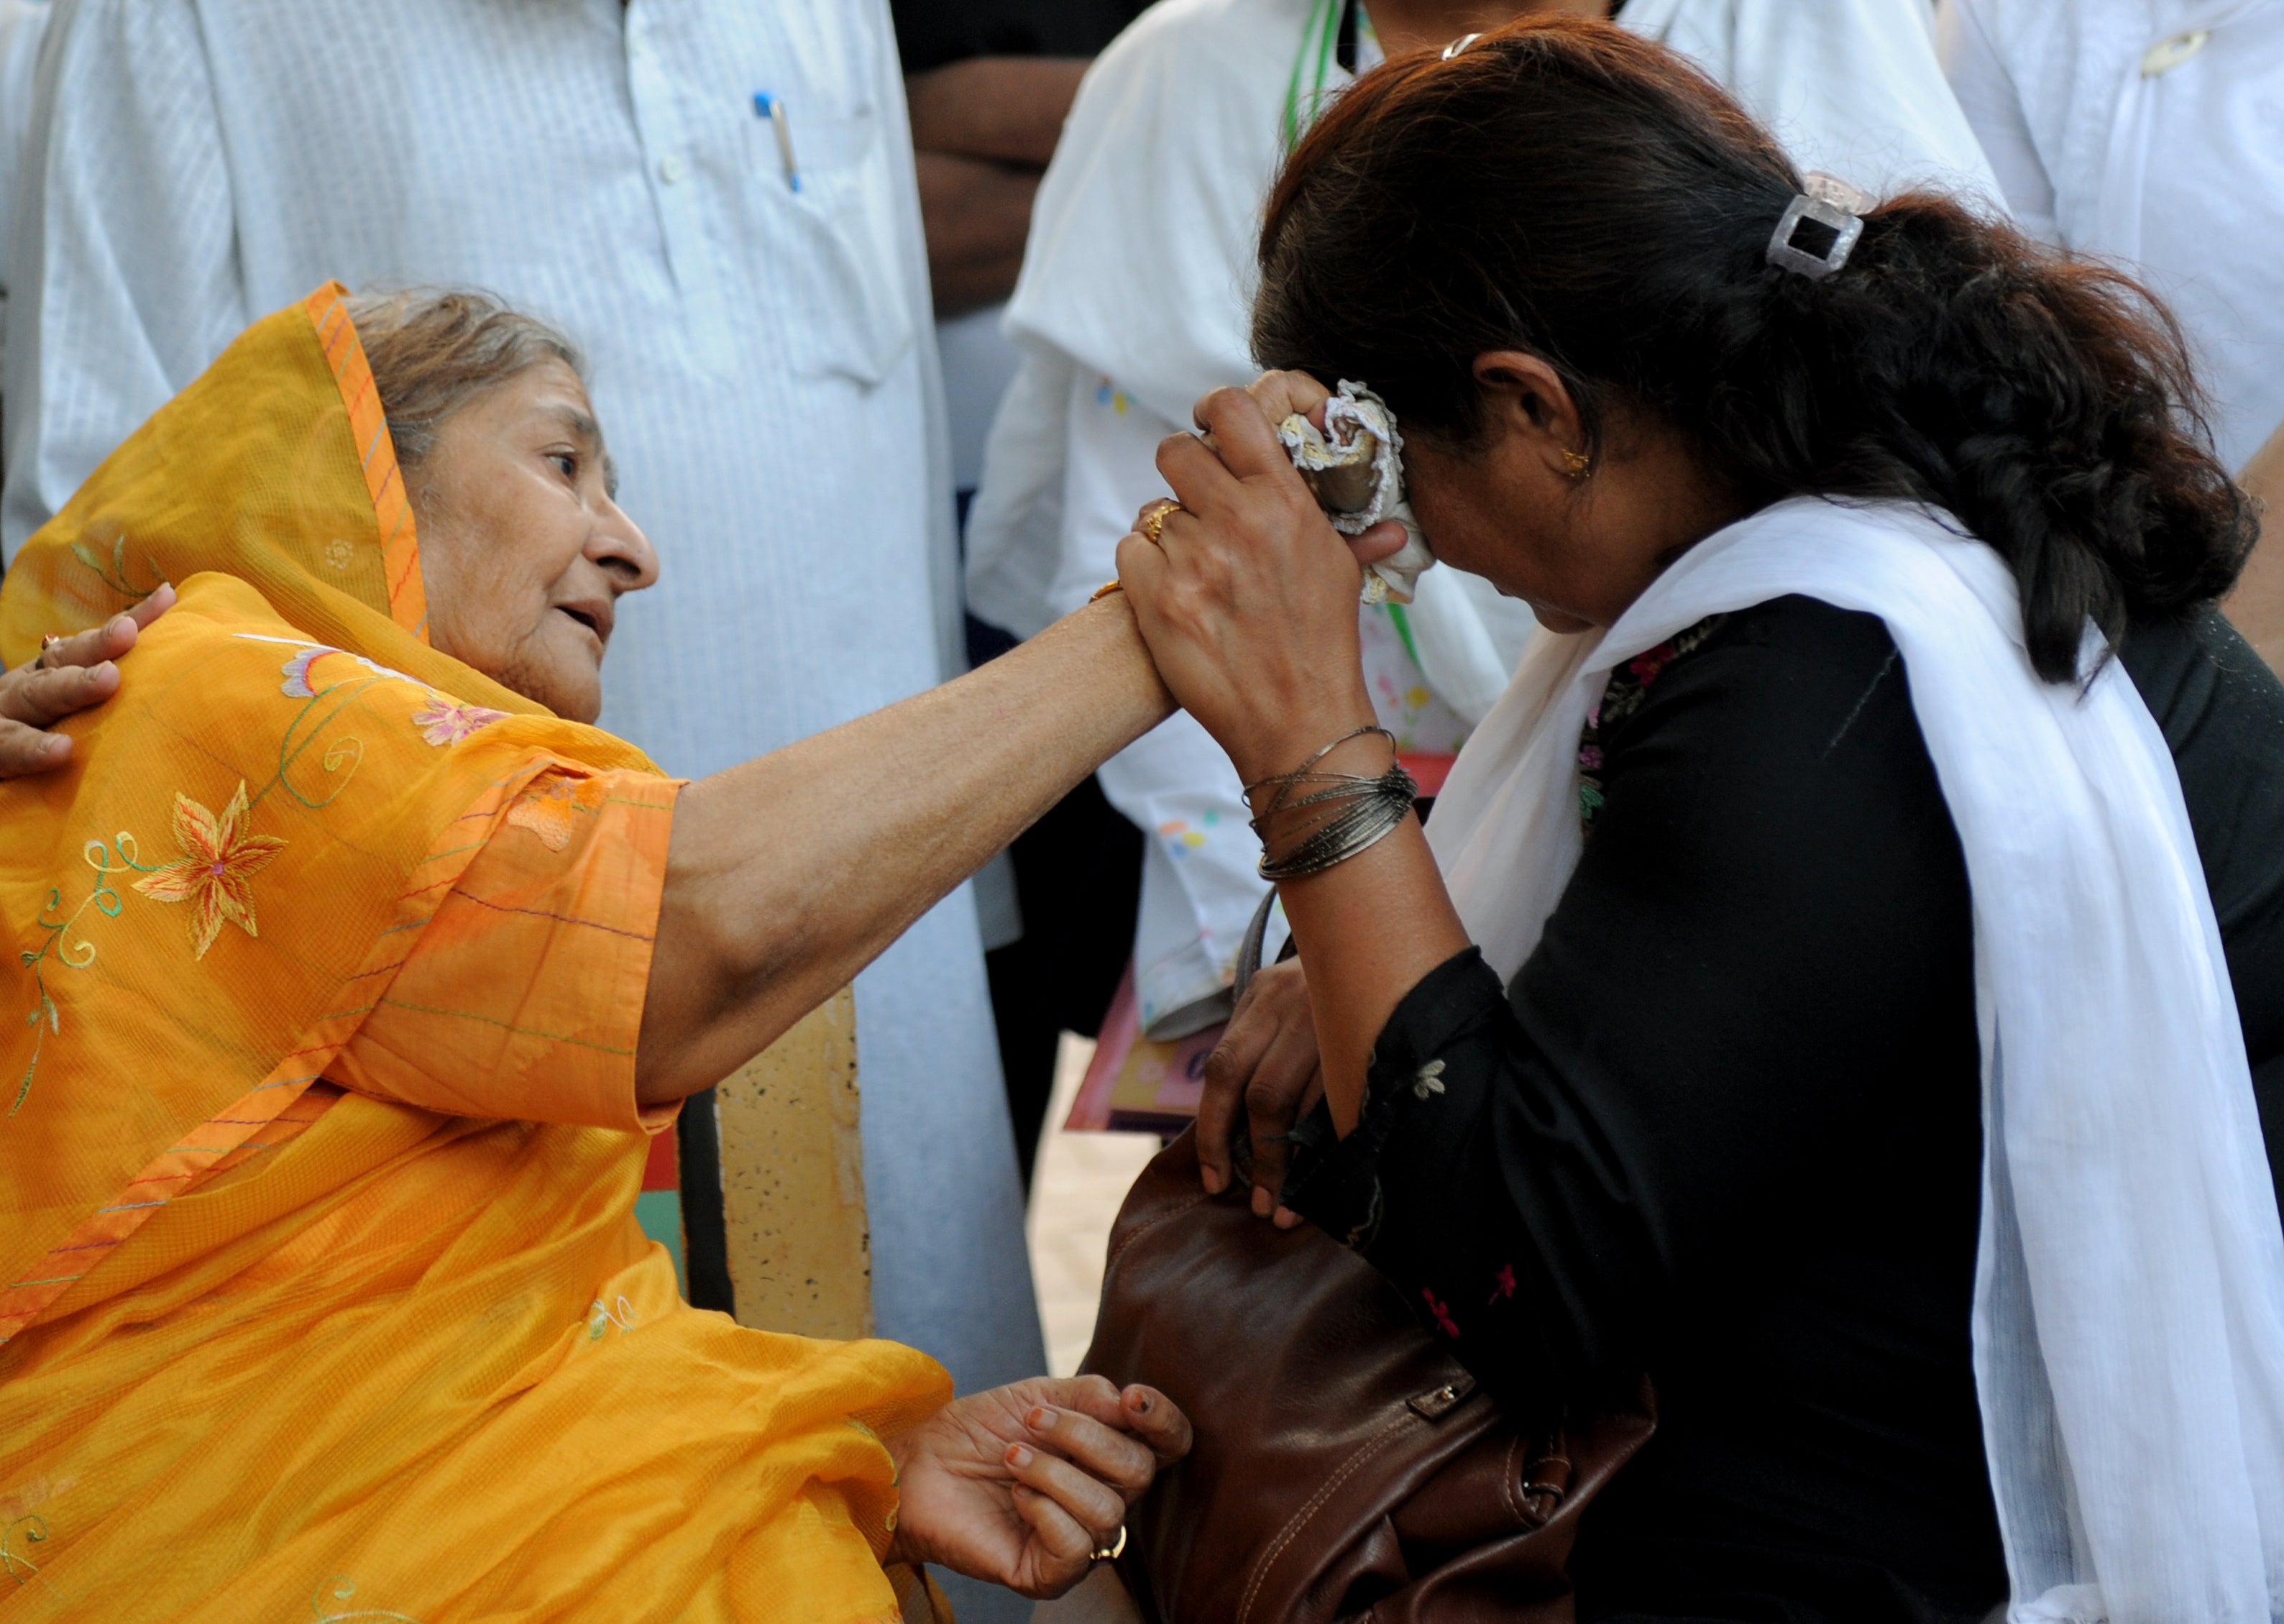 Widow Zakia Jafri (L) comforts grieving mother Rupa Modi outside a court in Ahmedabad on 26 December, 2013, following a judgement over the riots in favour of then-Gujarat chief minister Narendra Modi